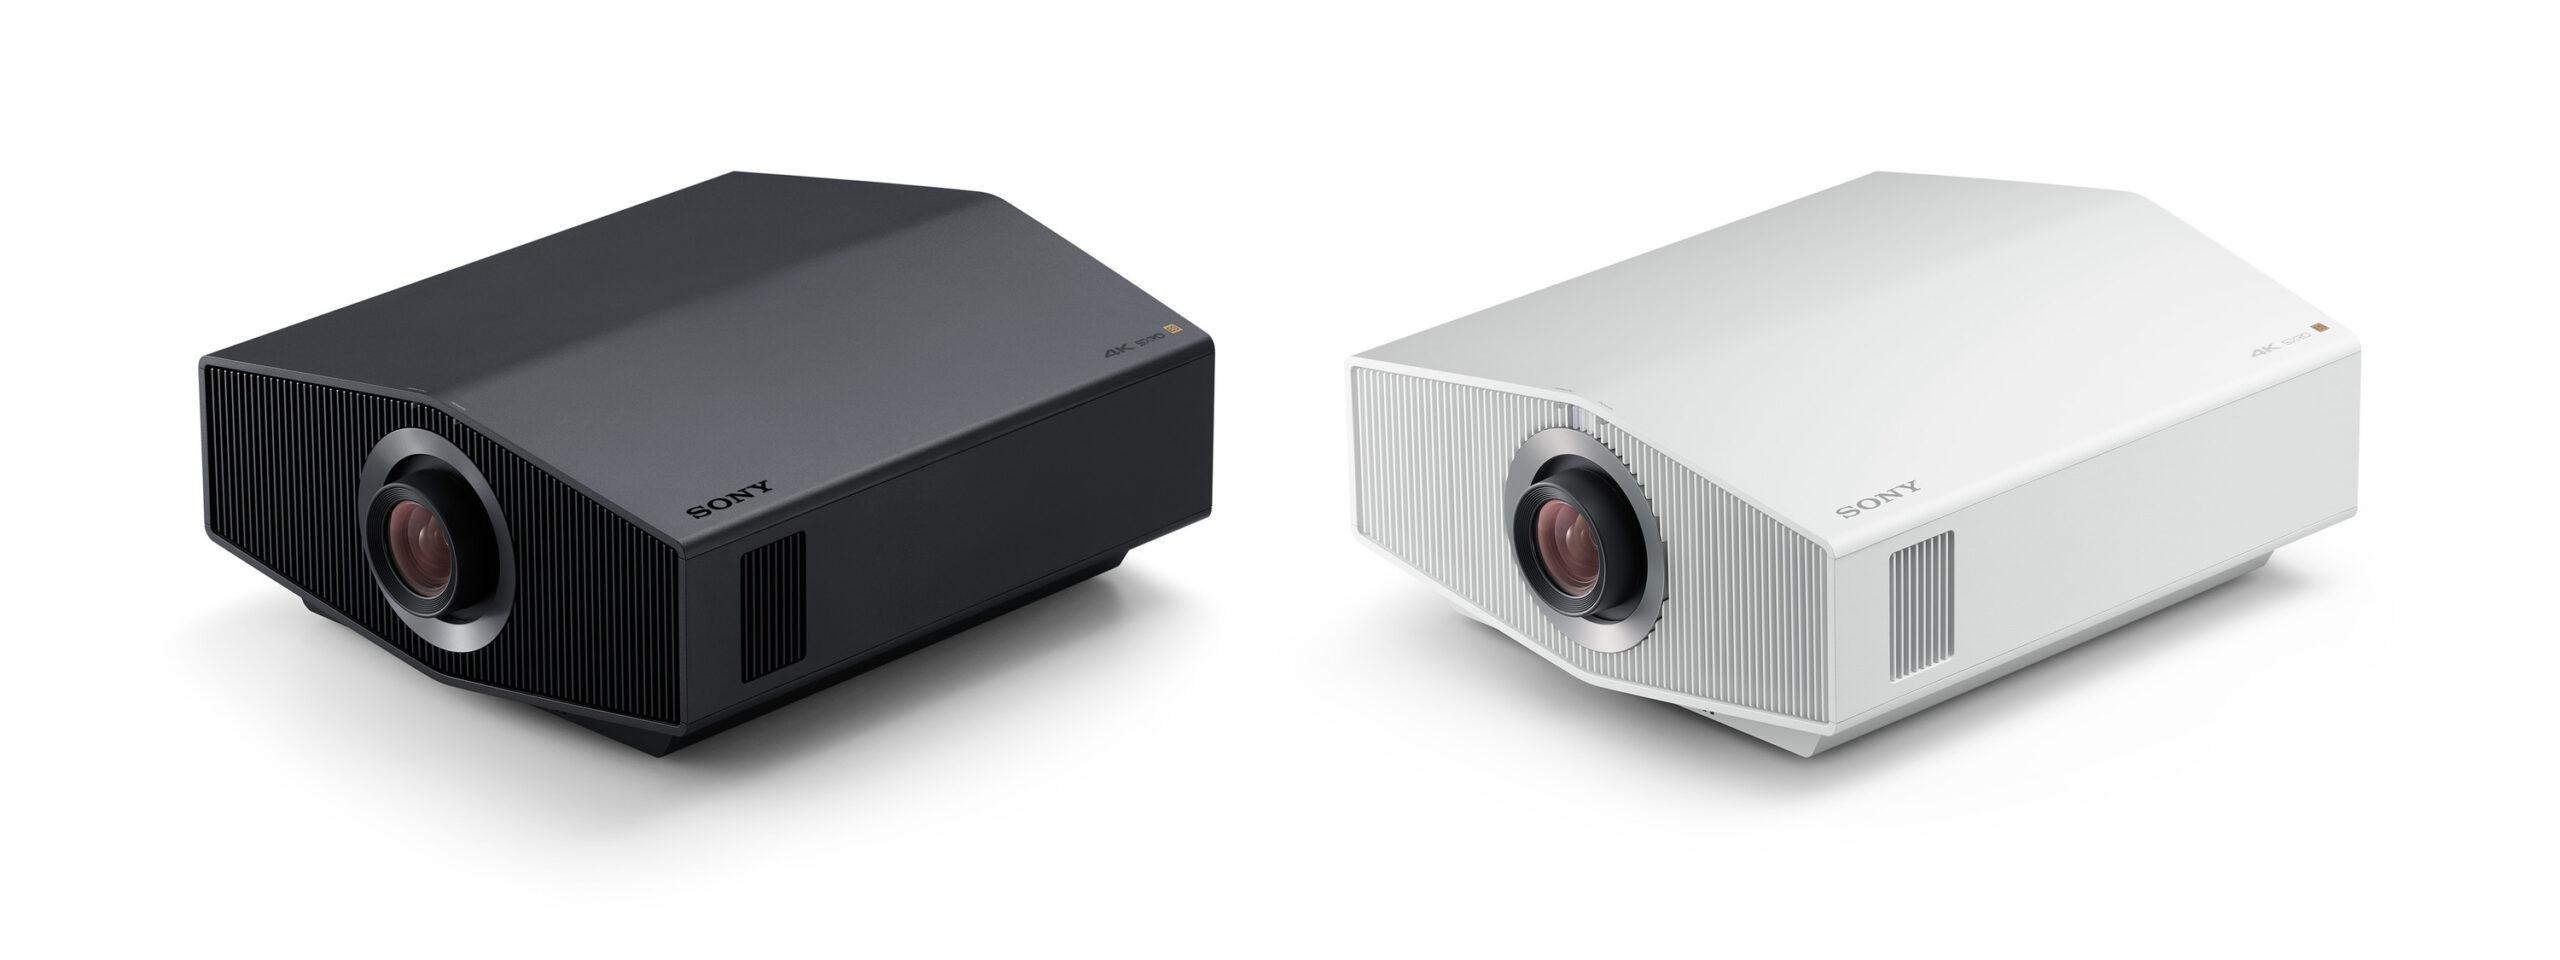 This is no mere annual refresh. Sony's three new home theater projectors are a generational leap forward. 90a2ede8 vplxw6000 others 220201 015 large scaled